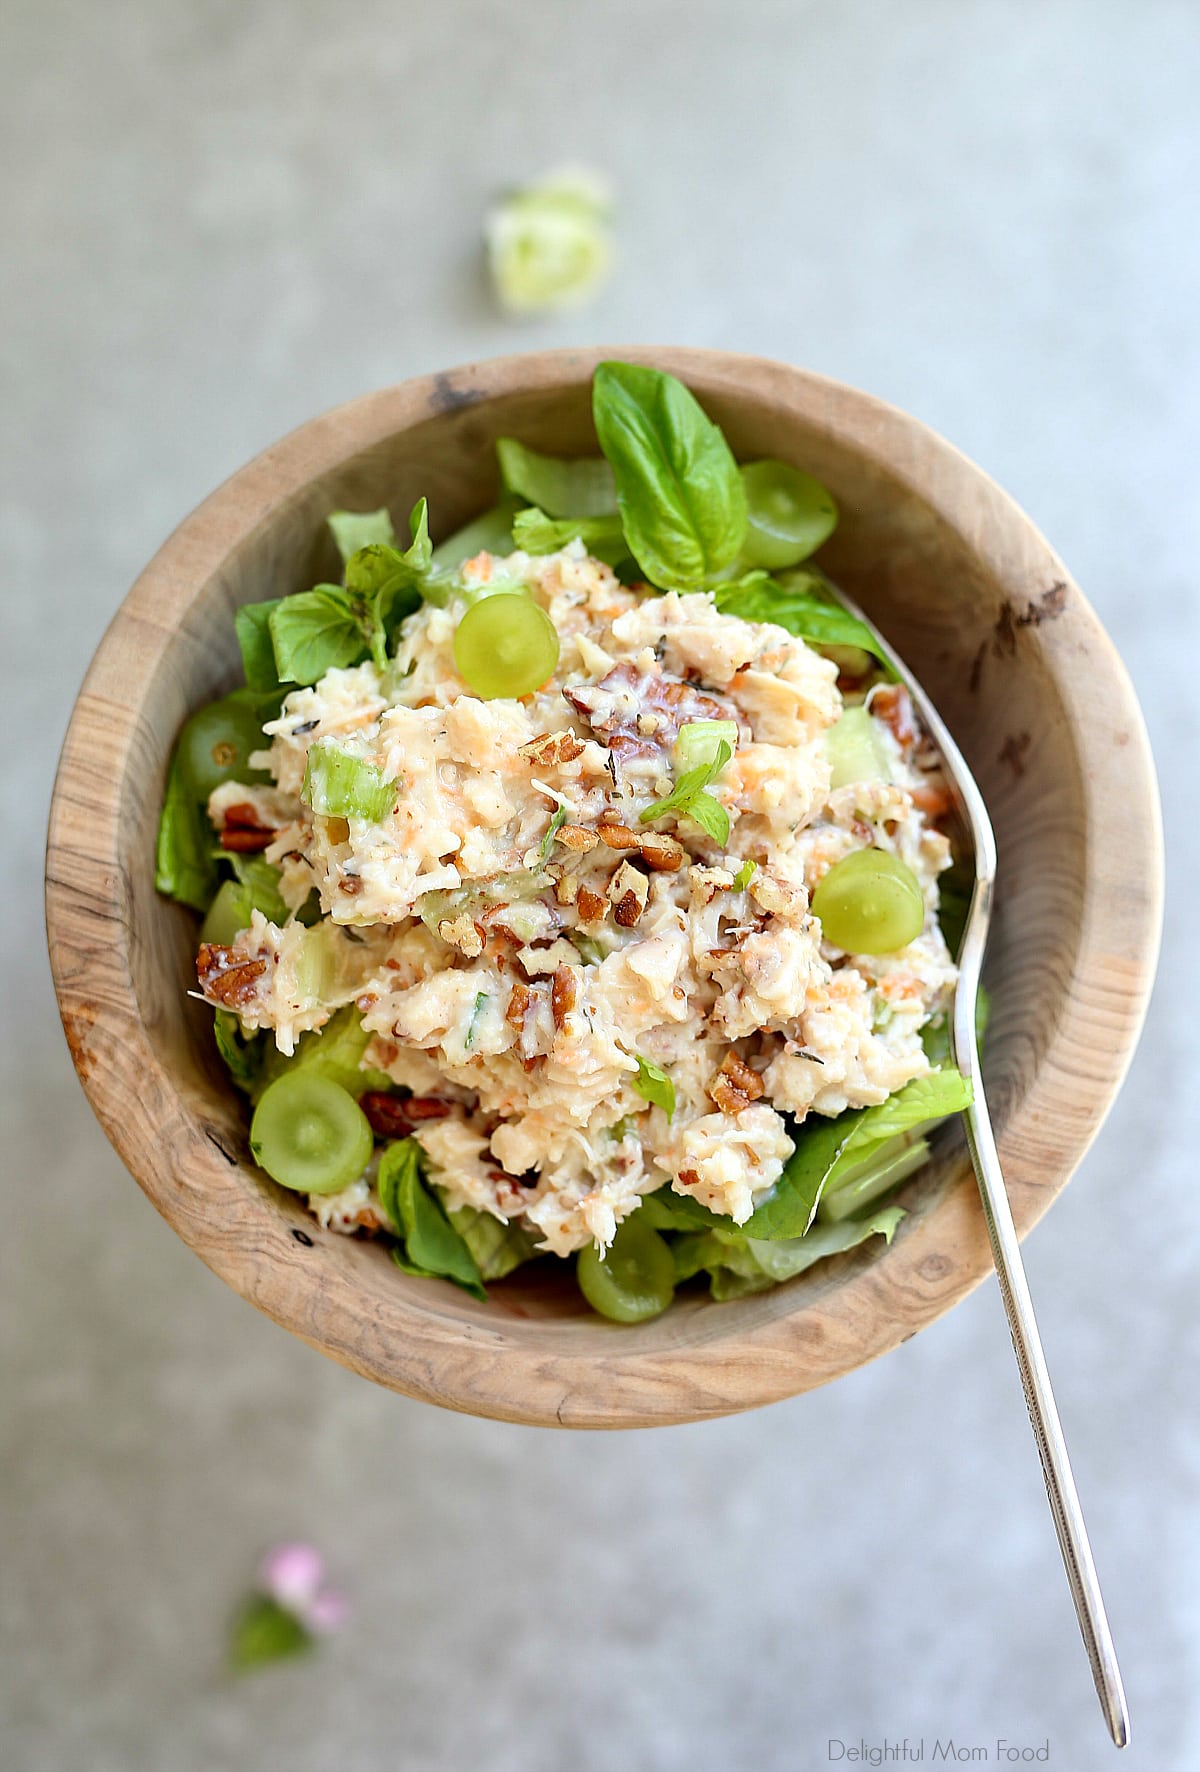 This crunchy and delectable yogurt pecan chicken salad takes less than 10 minutes to assemble, is keto, wholesome with vegetables added, and mouthwatering good! Top this satisfying meal over fresh greens or turned it into a chicken salad wrap with butter lettuce or tortillas. #pecanchickensalad #chickensaladrecipe #healthychickensalad #chicken #pecans #easy #lunch #glutenfree #keto #salad #delightfulmomfood | Recipe at Delightful Mom Food